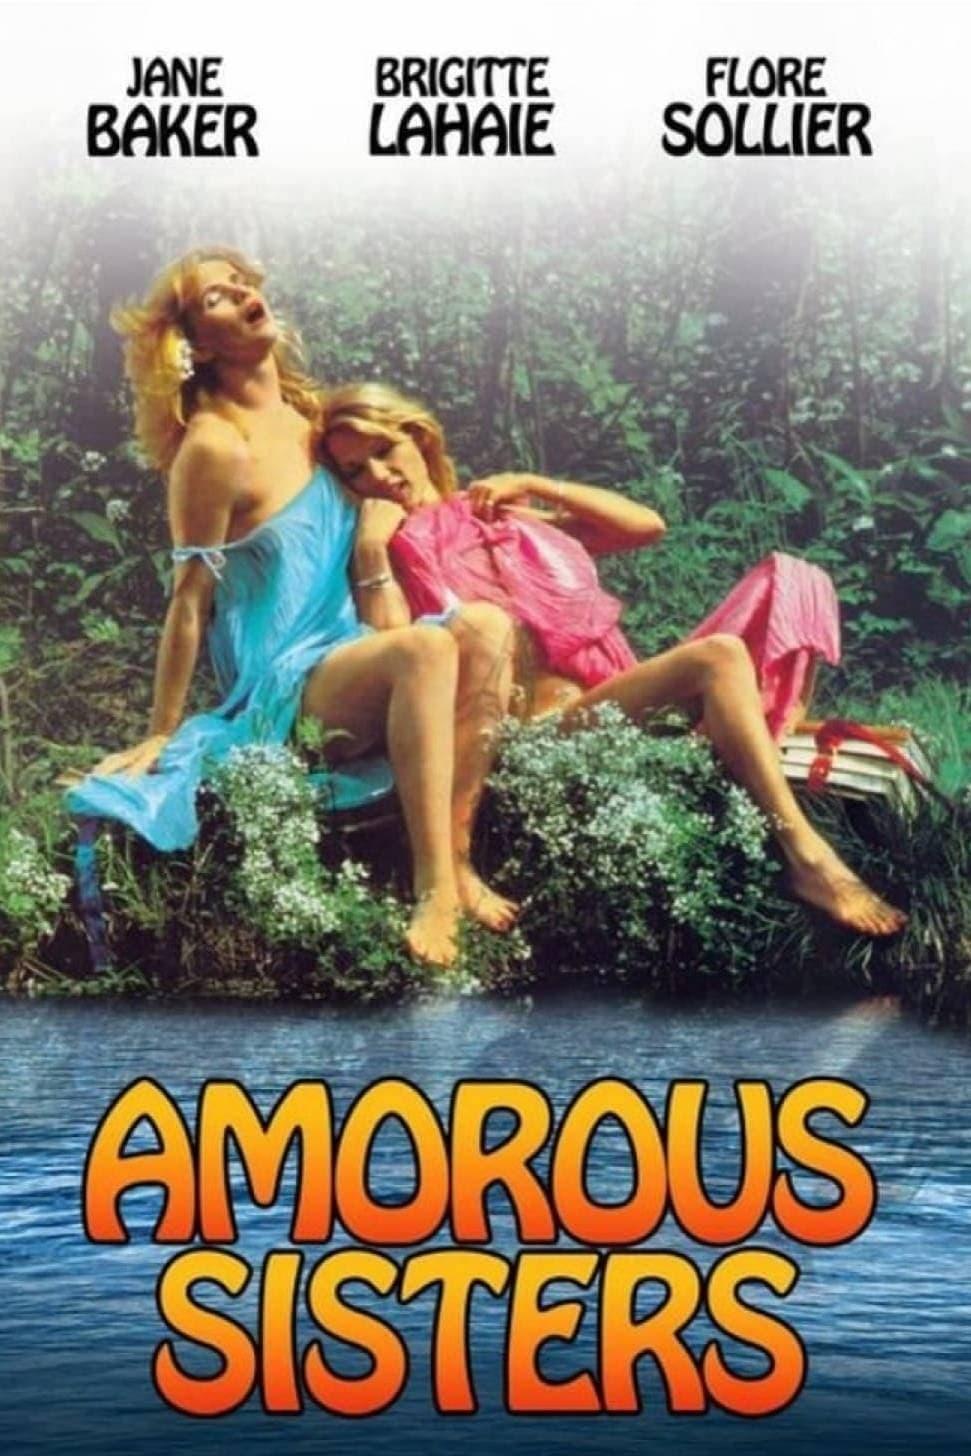 The Amorous Sisters poster